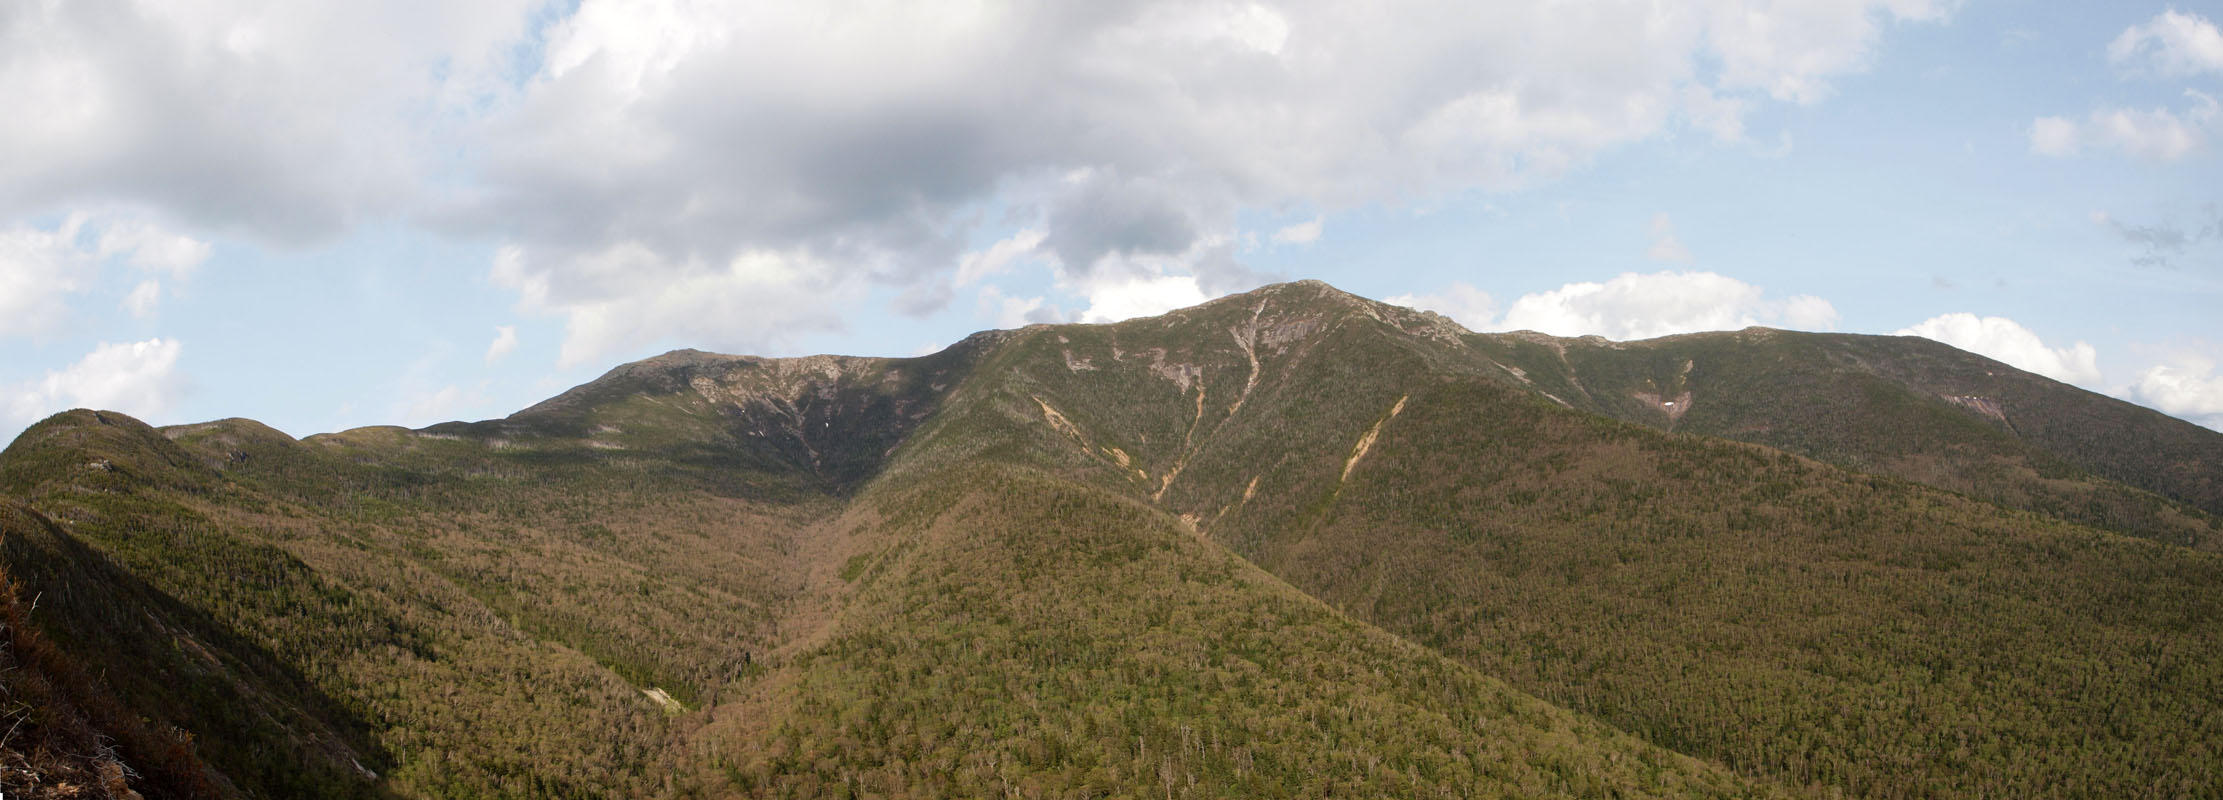 Panorama - Peaks of the Franconia Ridge from lookout point on Old Bridle Path trail